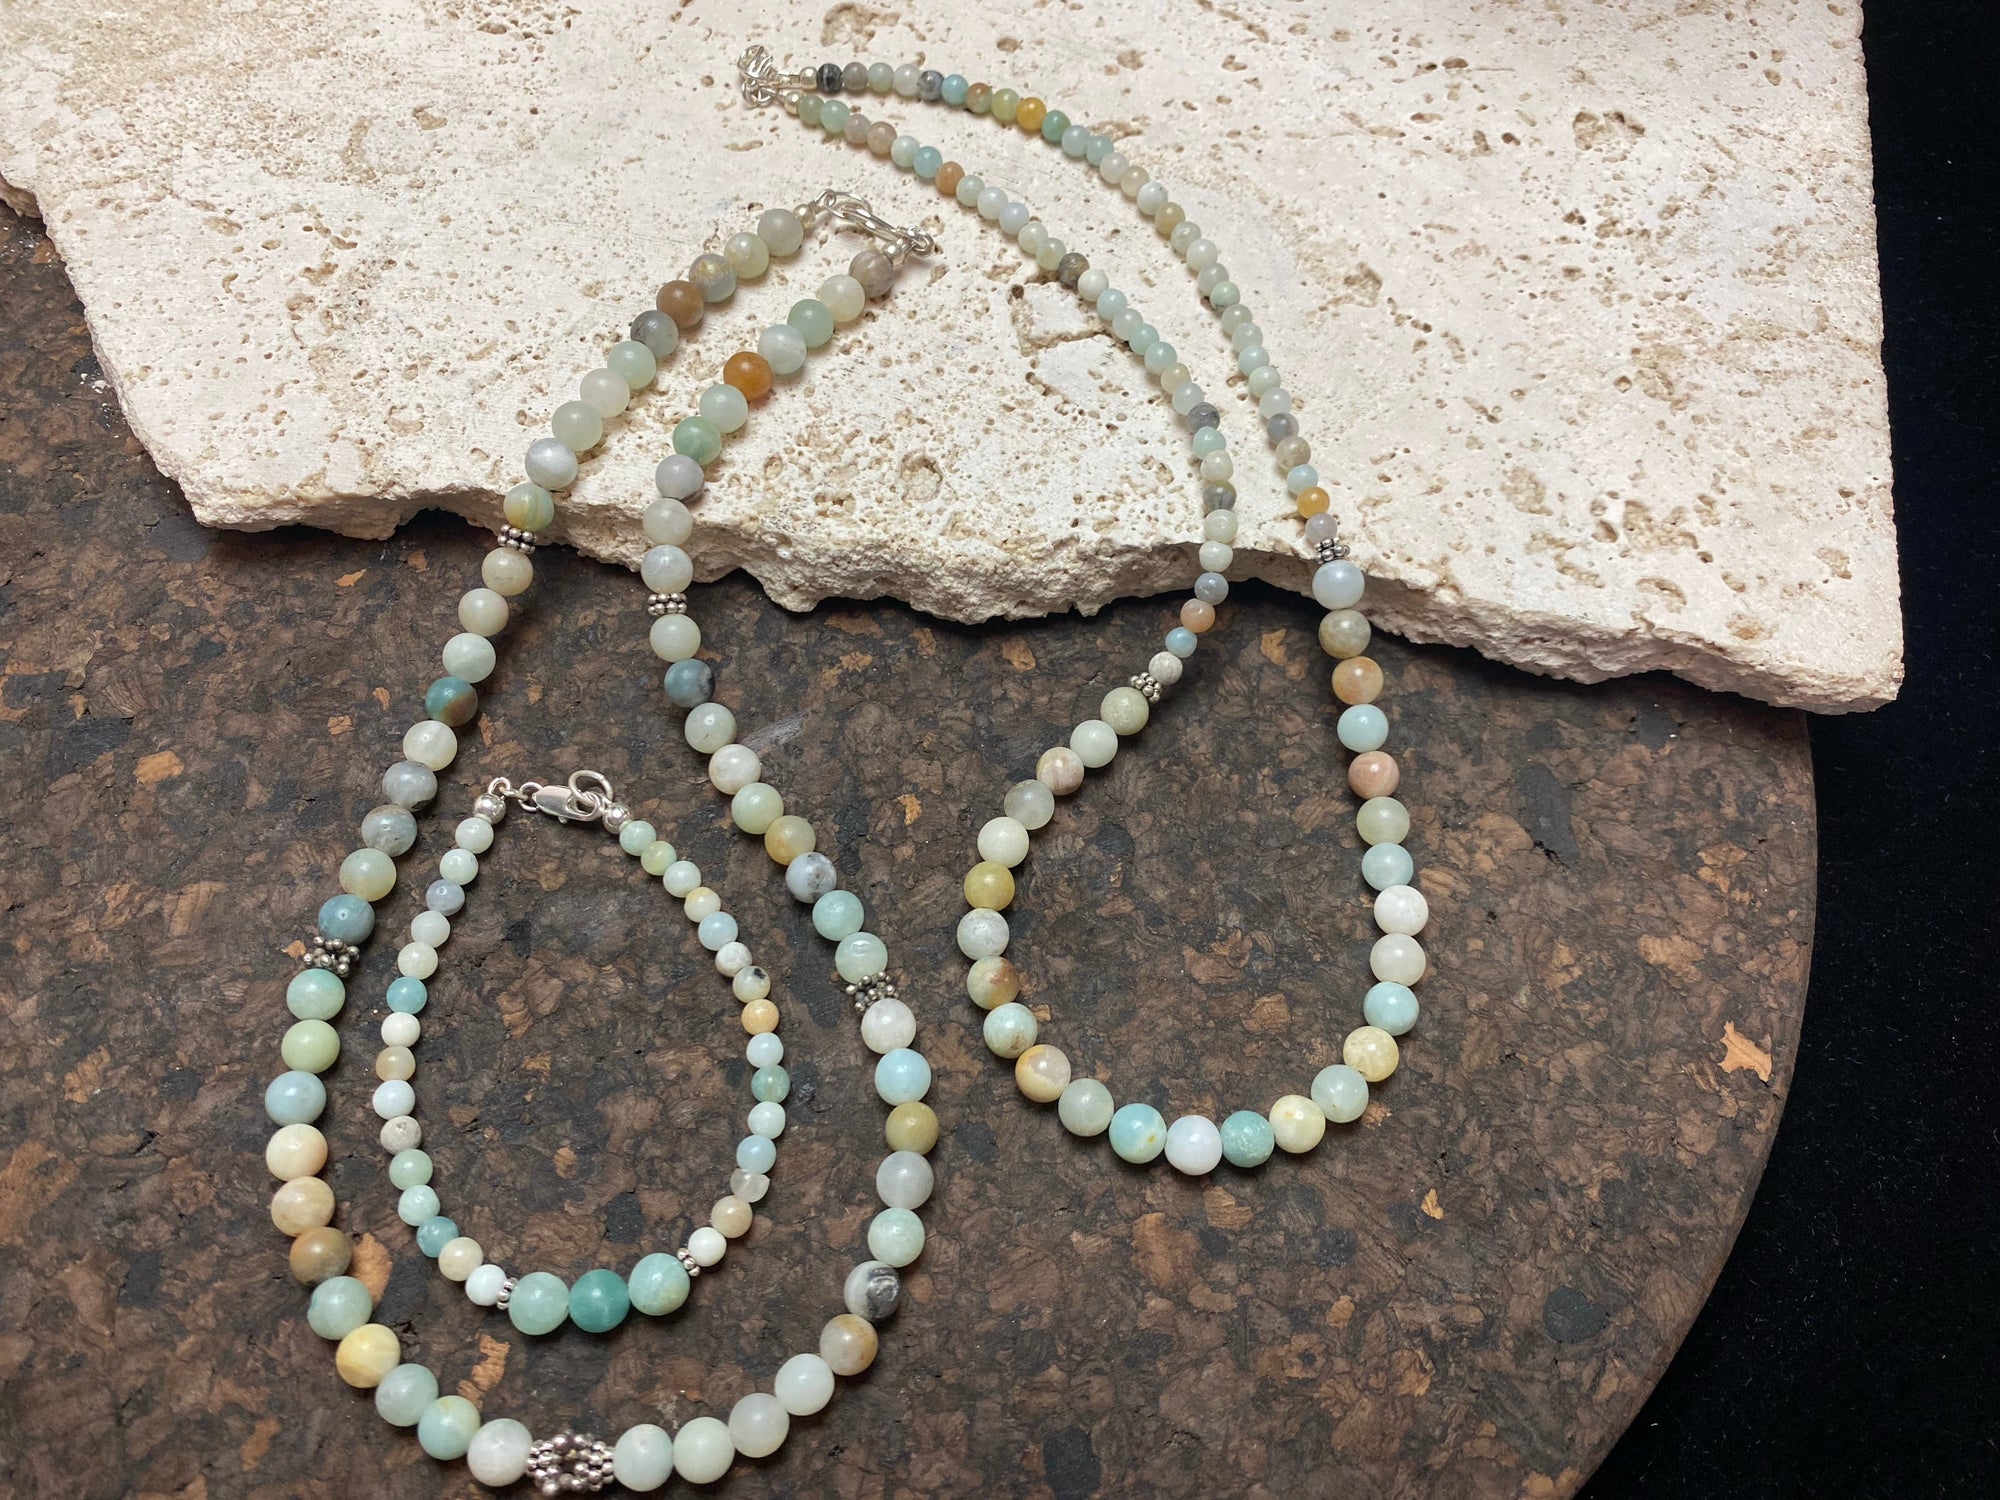 Glowing natural pastel hued graduated quartz beads teamed with sterling silver feature beads and findings